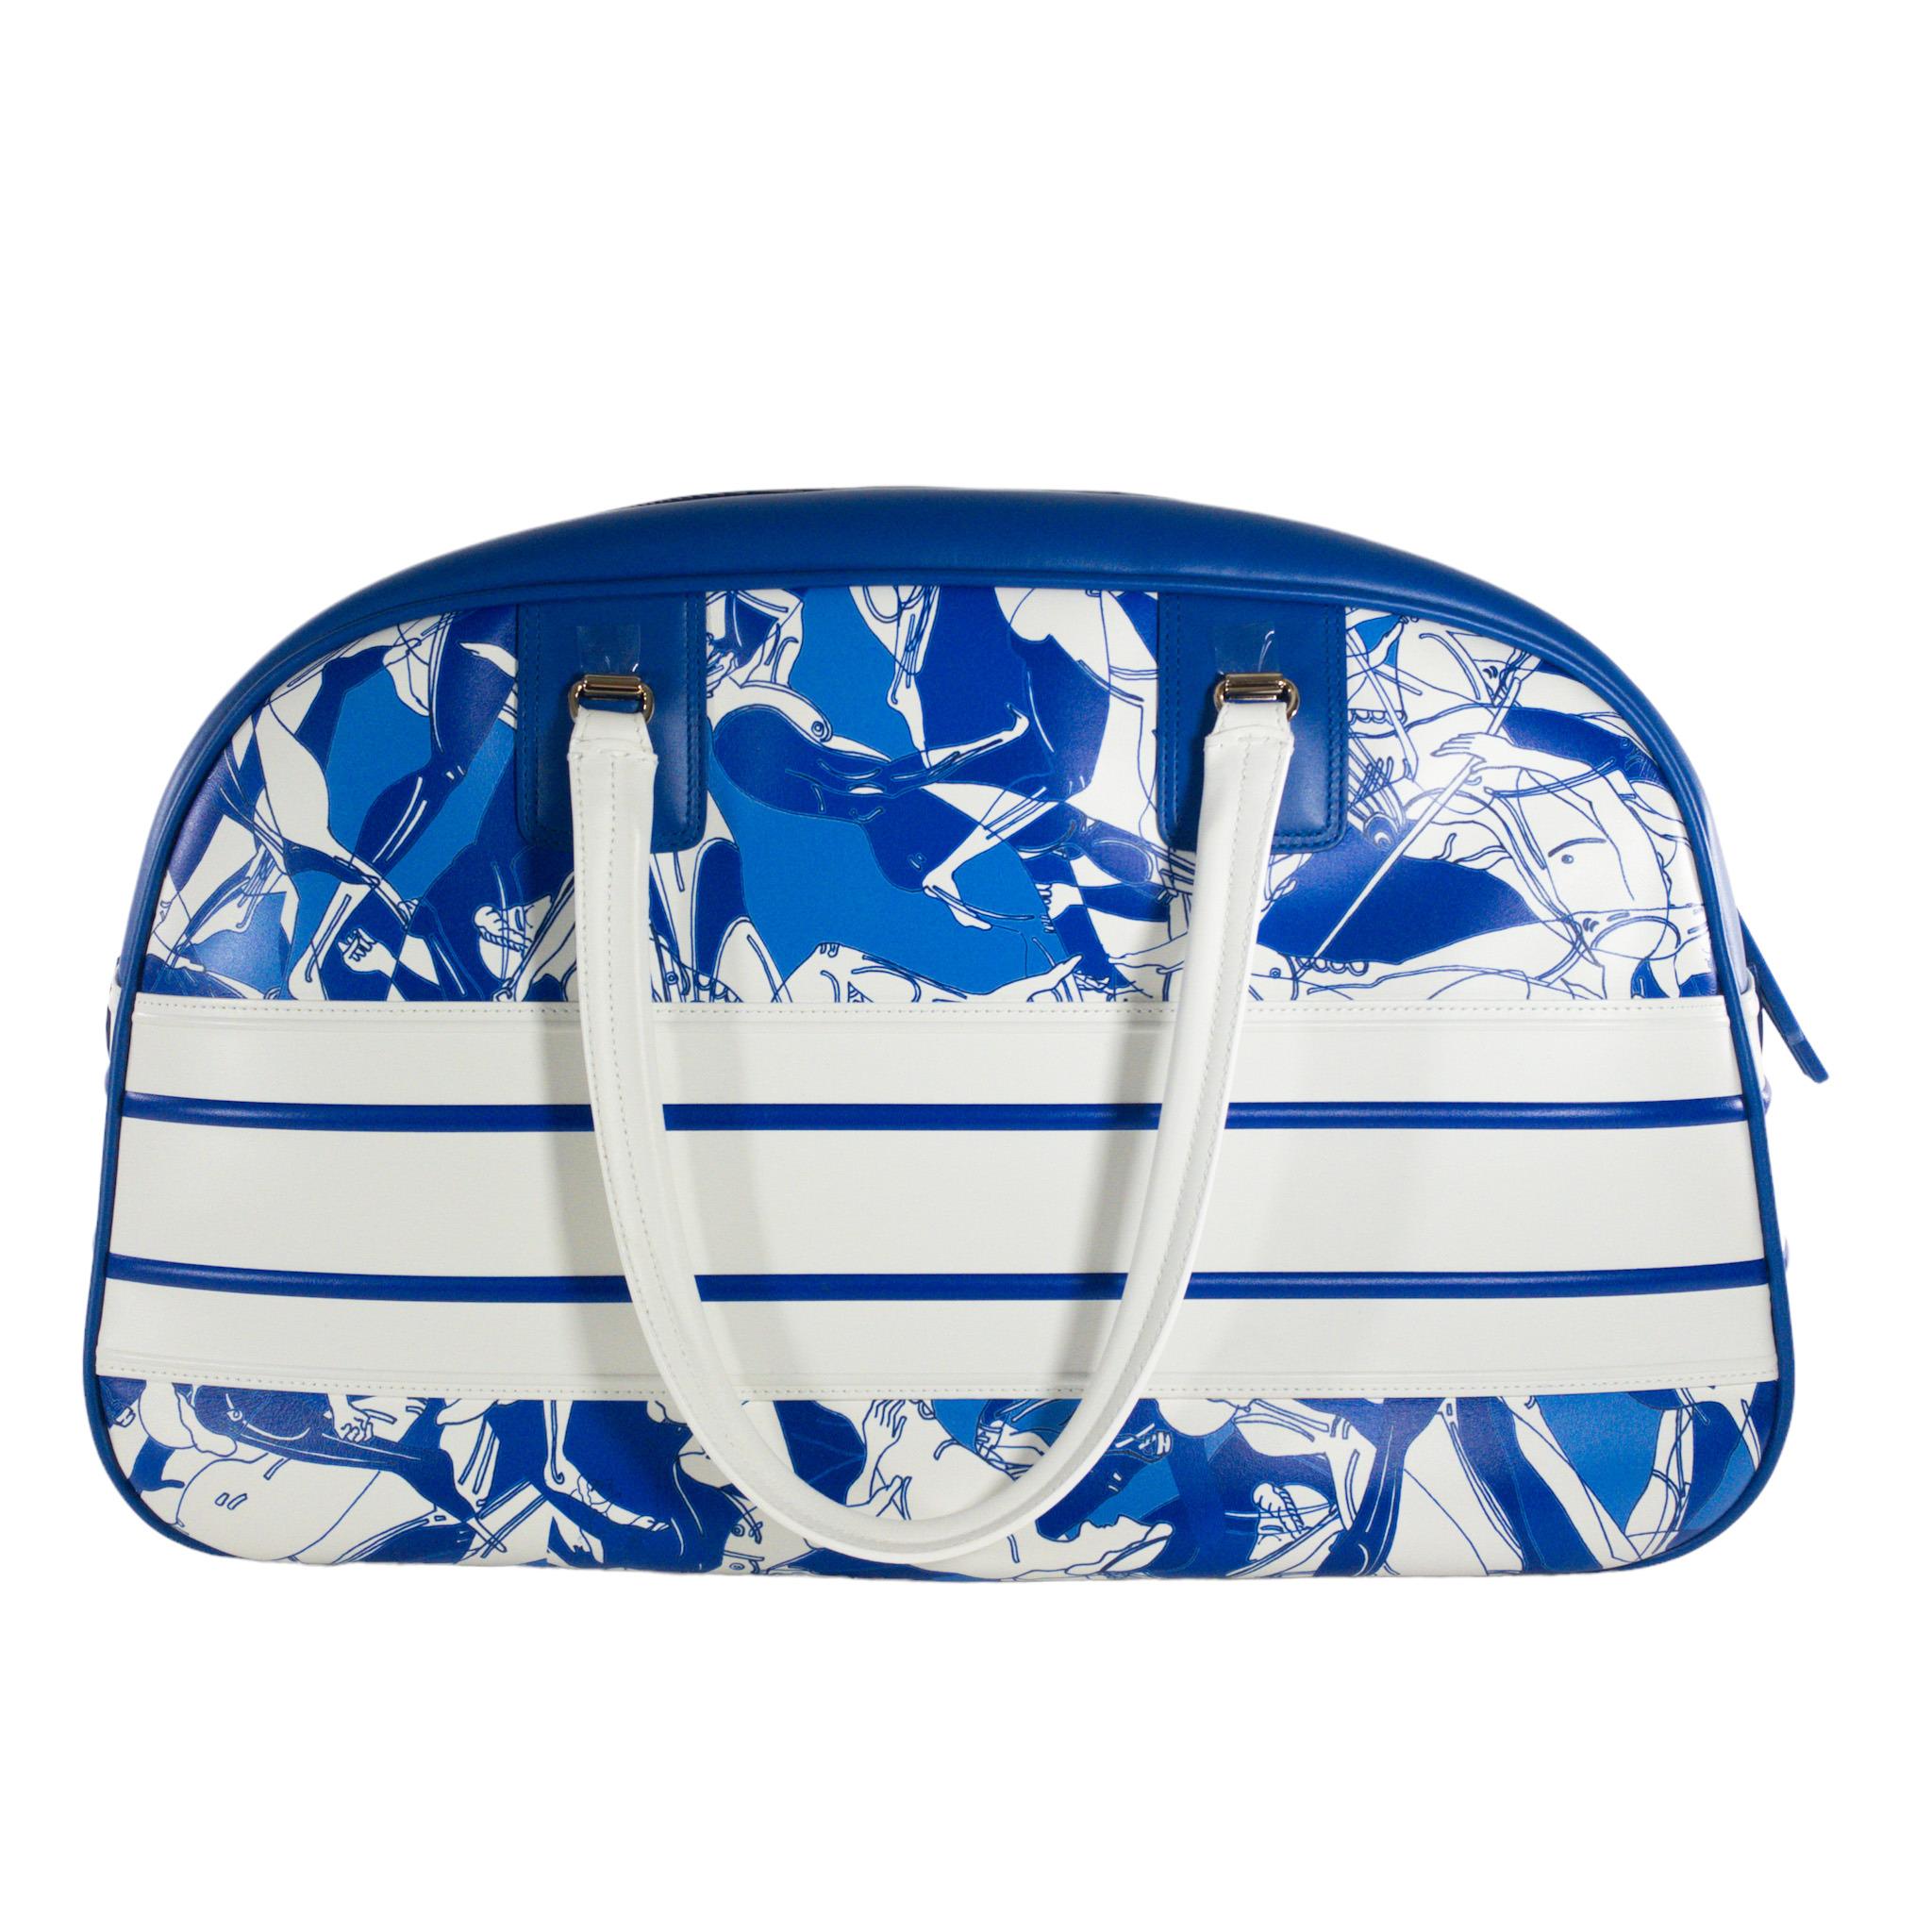 Dior Vibe Large Bowling Bag

This is an authentic Dior Vibe Bowling Bag in size Large. Blue and white printed leather with rubber treaded base. Zip top opening. Two wrapped leather handles. Lined with beige fabric.

Additional information:
Included